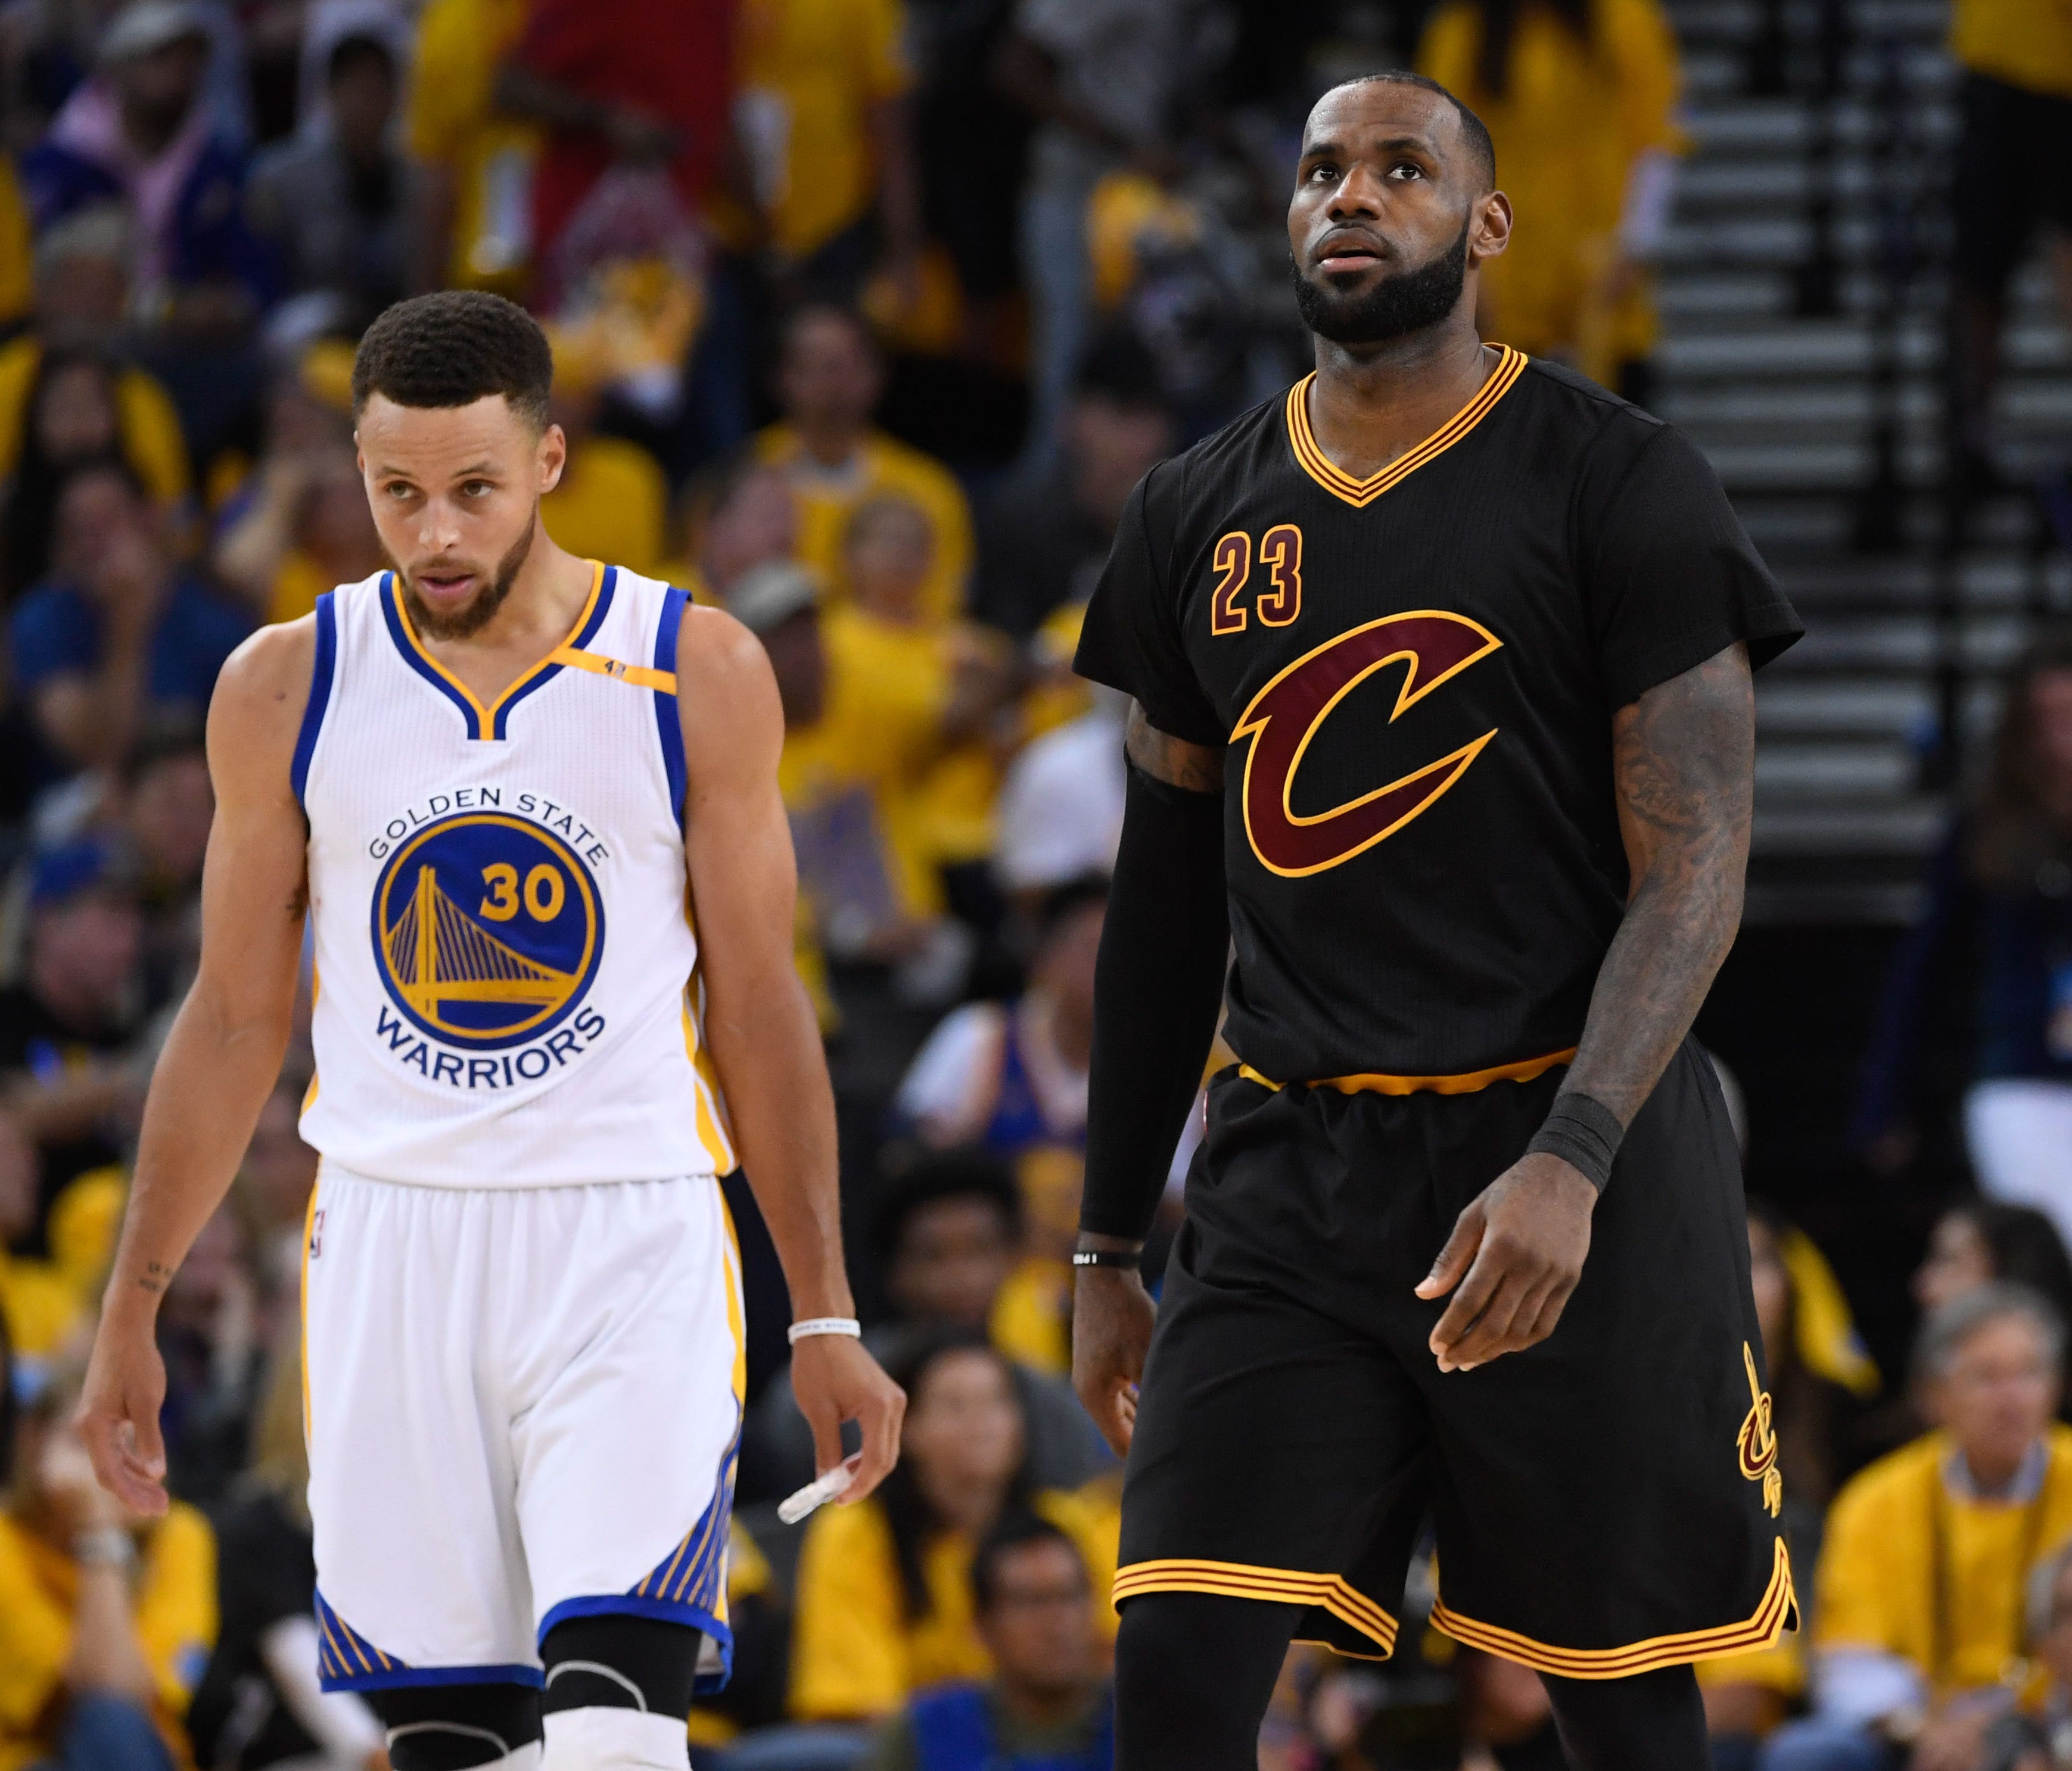 Golden State Warriors guard Stephen Curry (30) and Cleveland Cavaliers forward LeBron James (23) during the fourth quarter in game two of the 2017 NBA Finals at Oracle Arena.